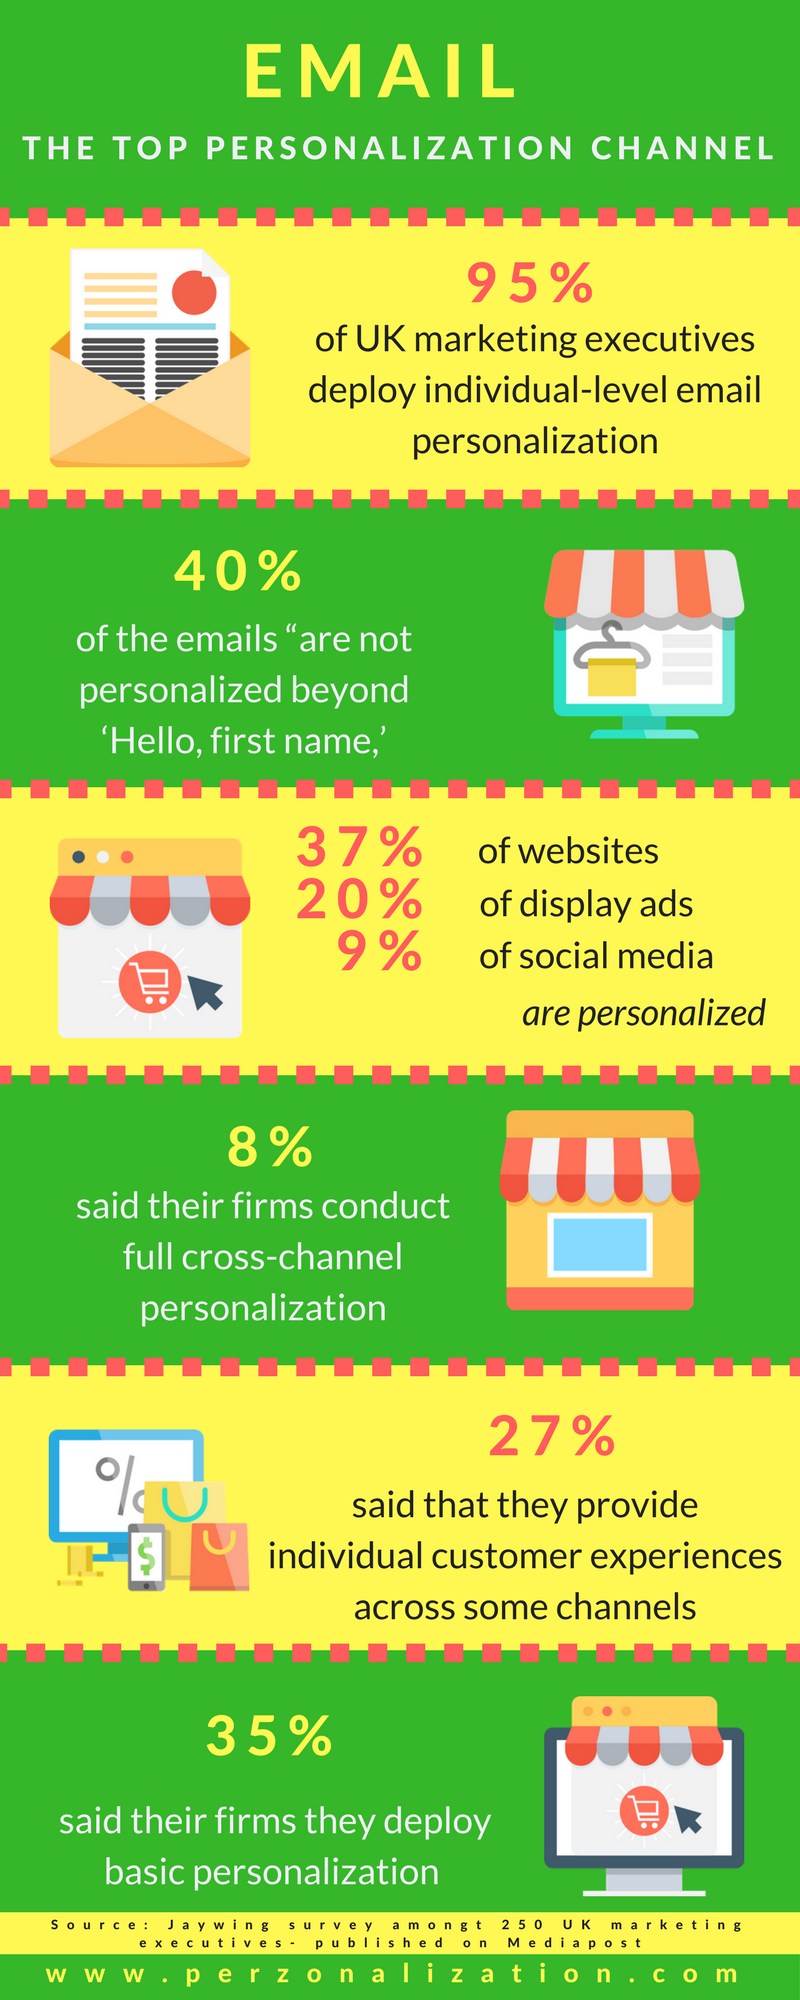 EMAIL IS THE TOP PERSONALIZATION CHANNEL IN THE UK INFOGRAPHIC